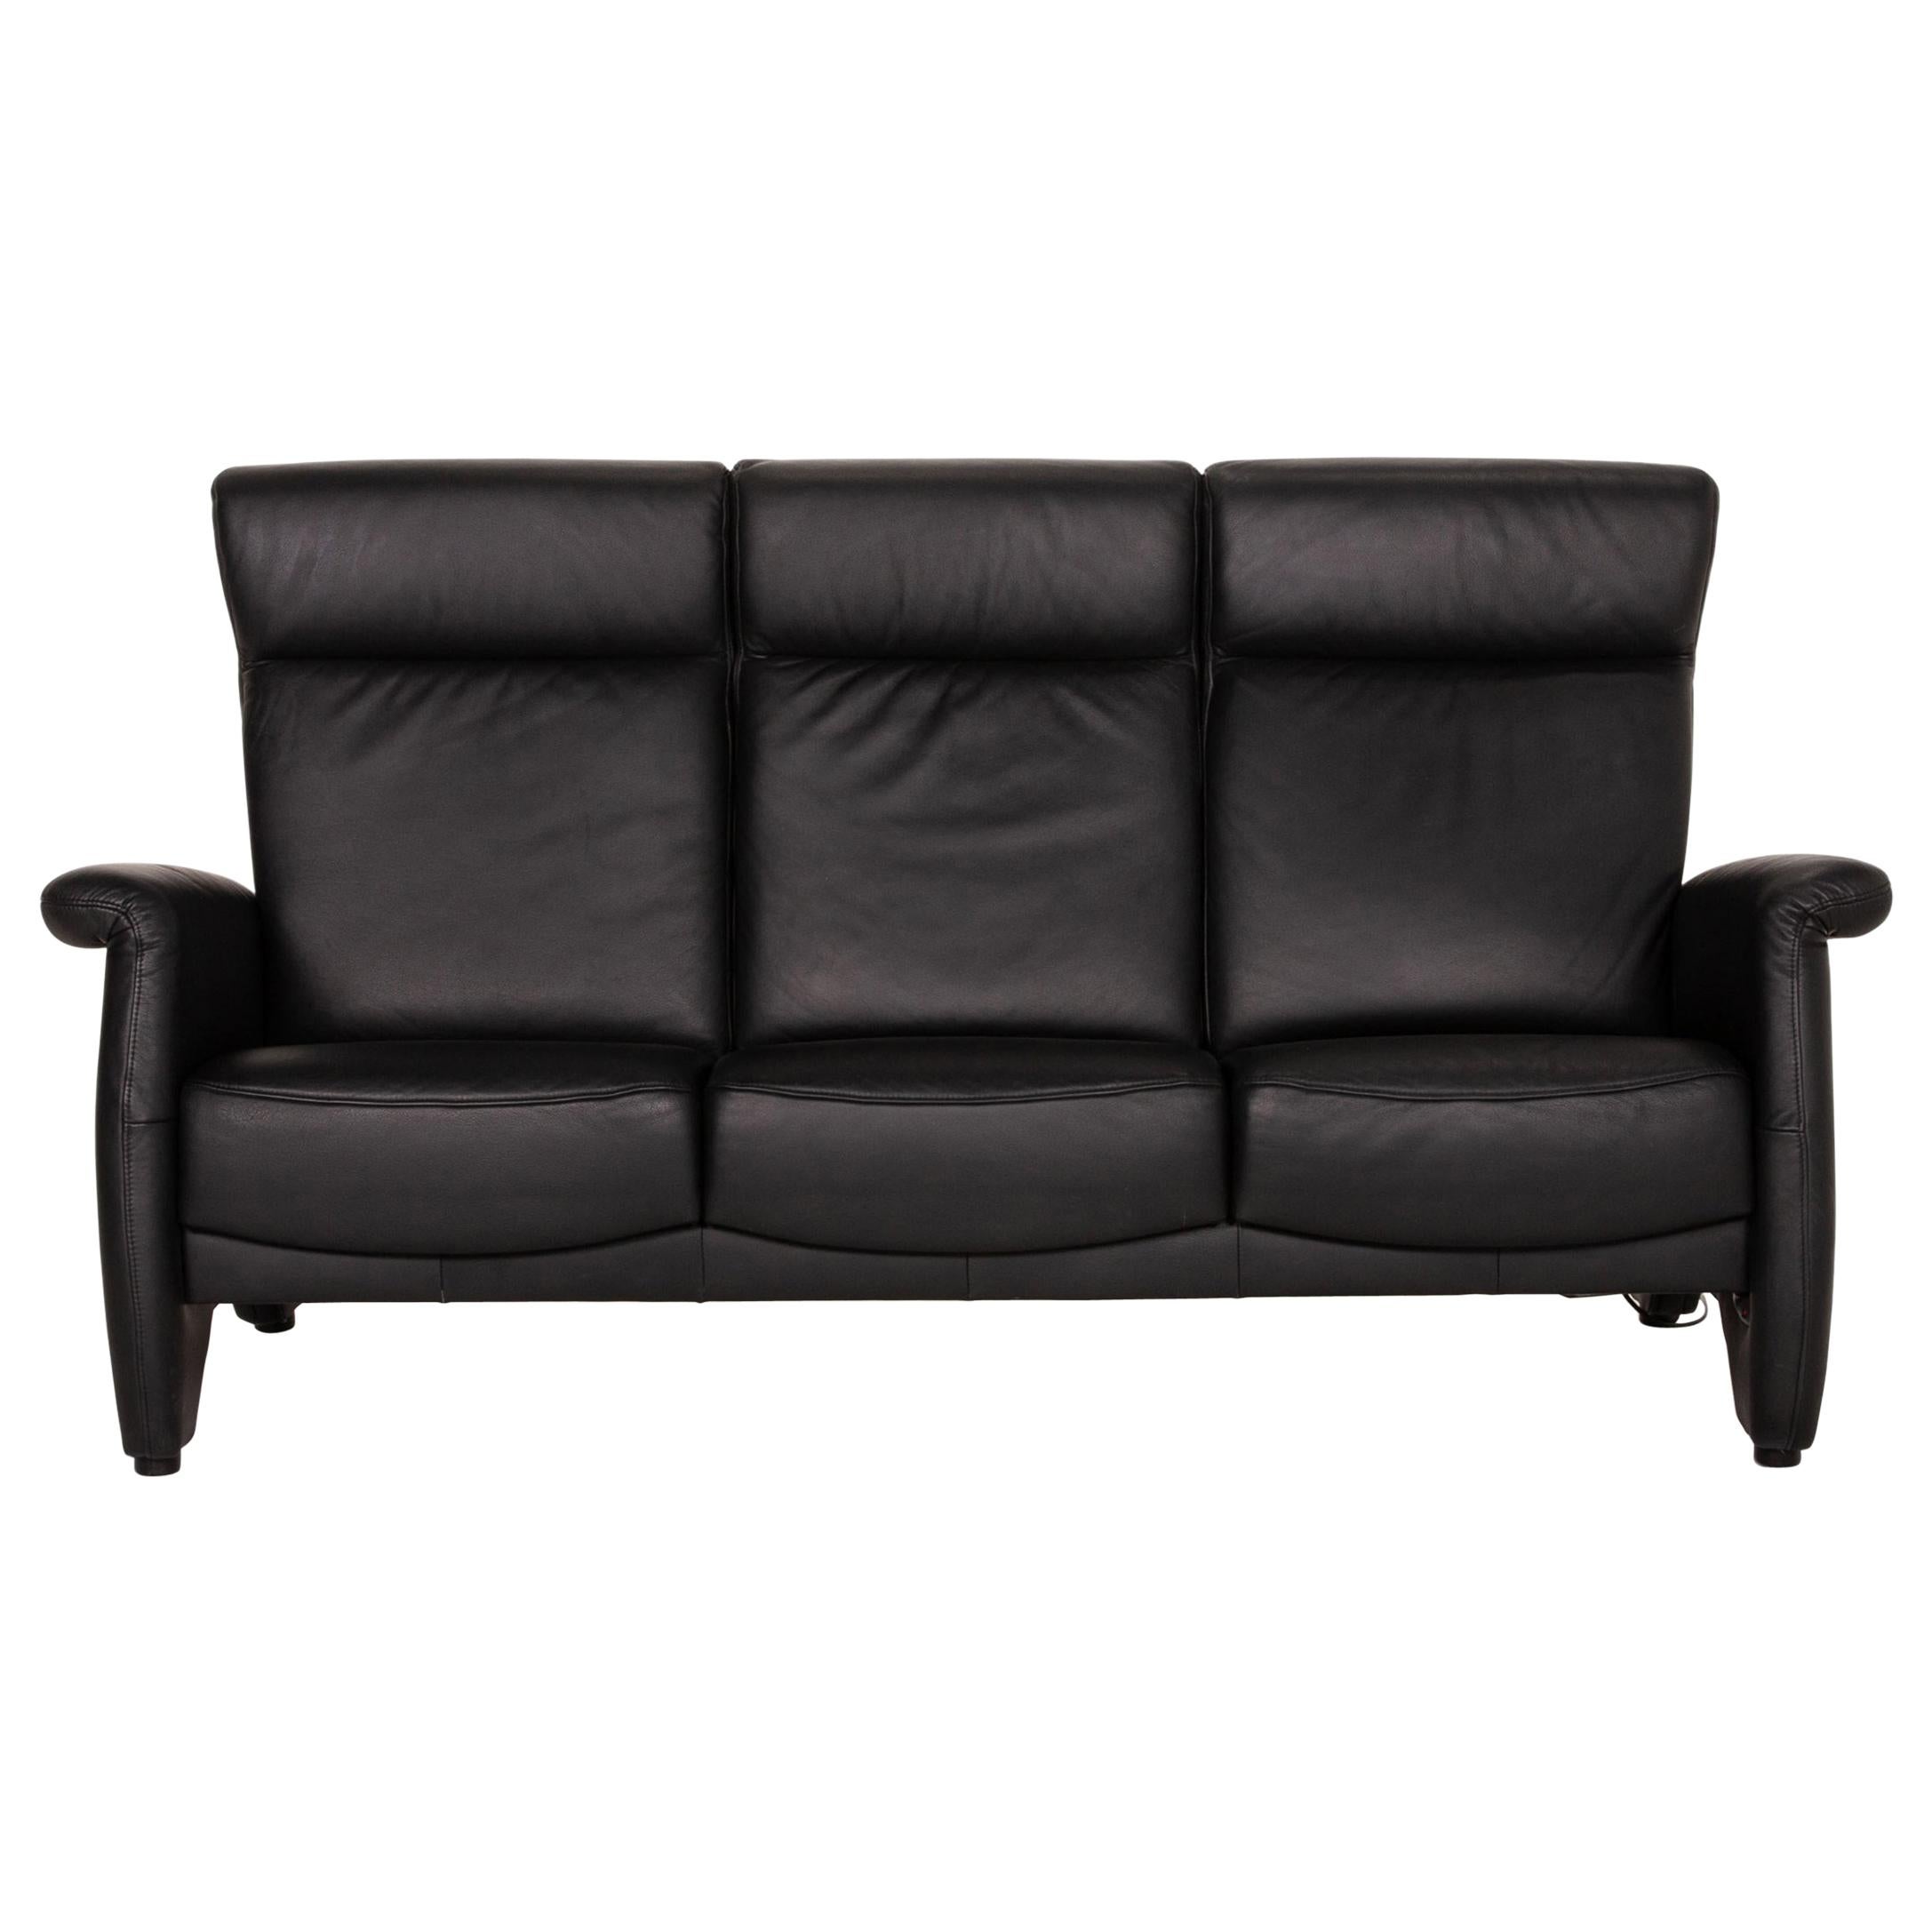 Himolla Ergoline Leather Sofa Black Three Seater Function Couch For Sale